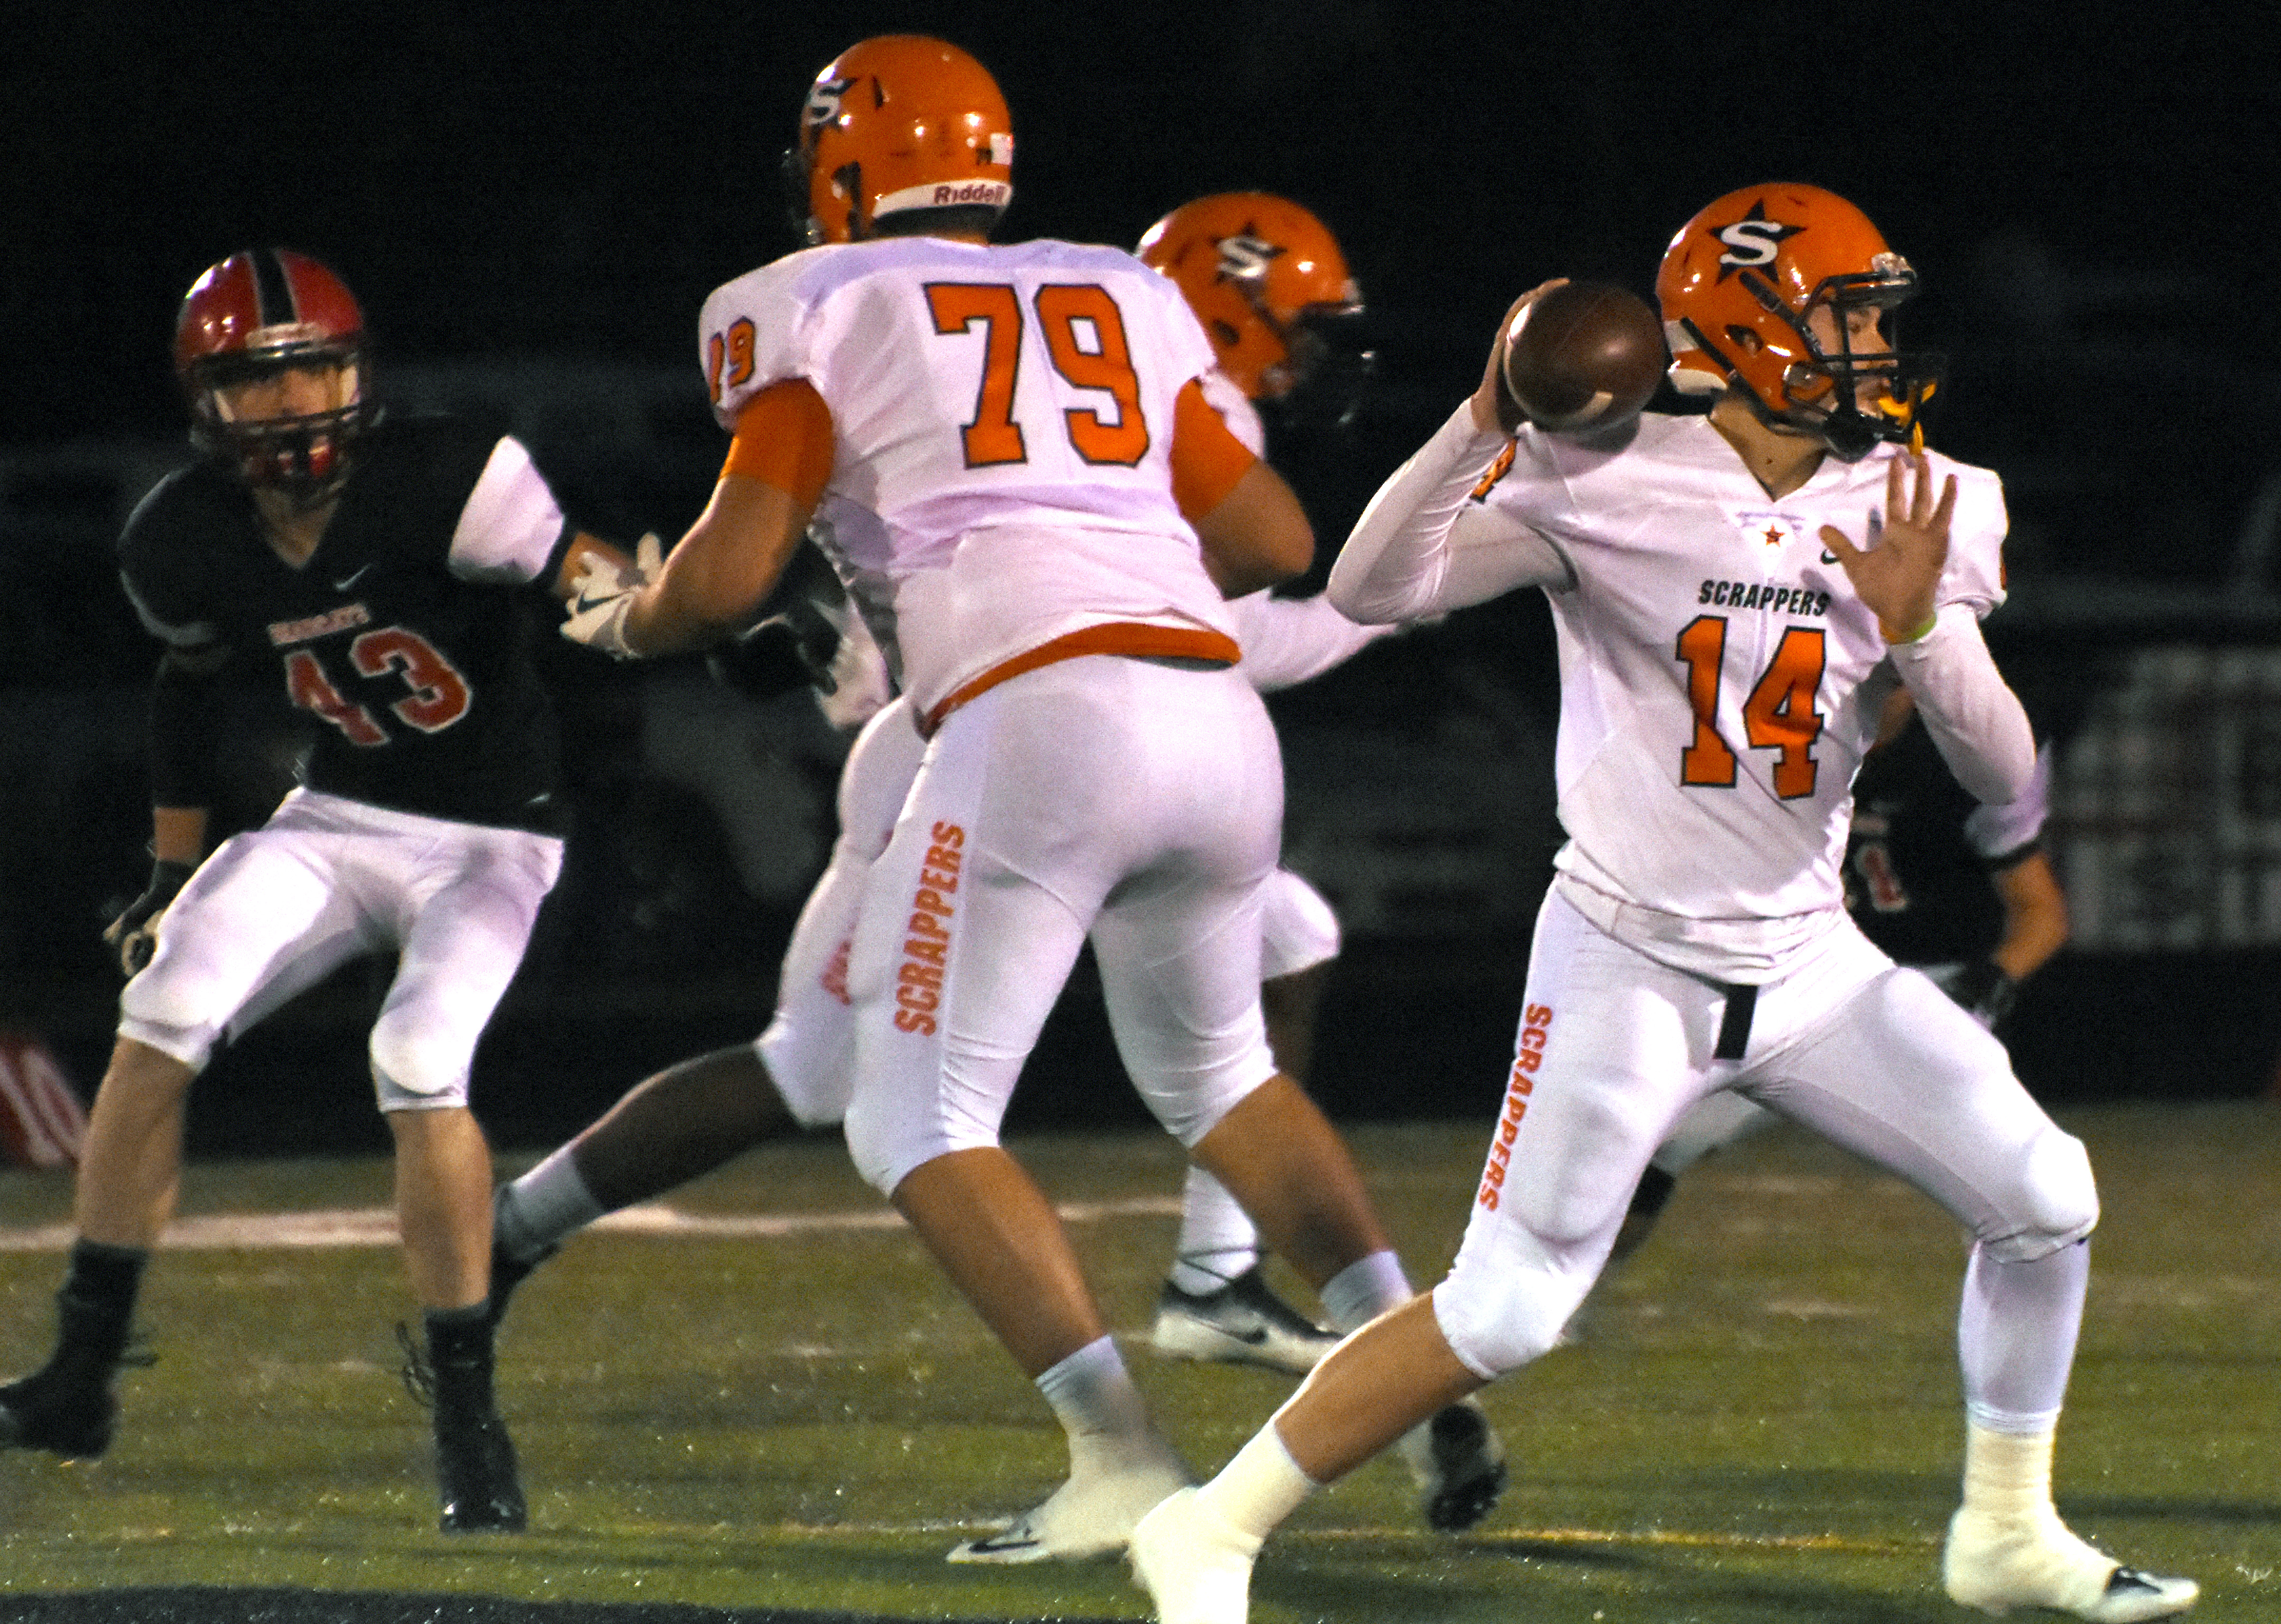 Scrapper quarterback Tyler Hanson (14) sets up a touchdown pass to Ty Pettway while Kirby Adcock (79) keeps the Mena Bearcat defender at bay Friday night.